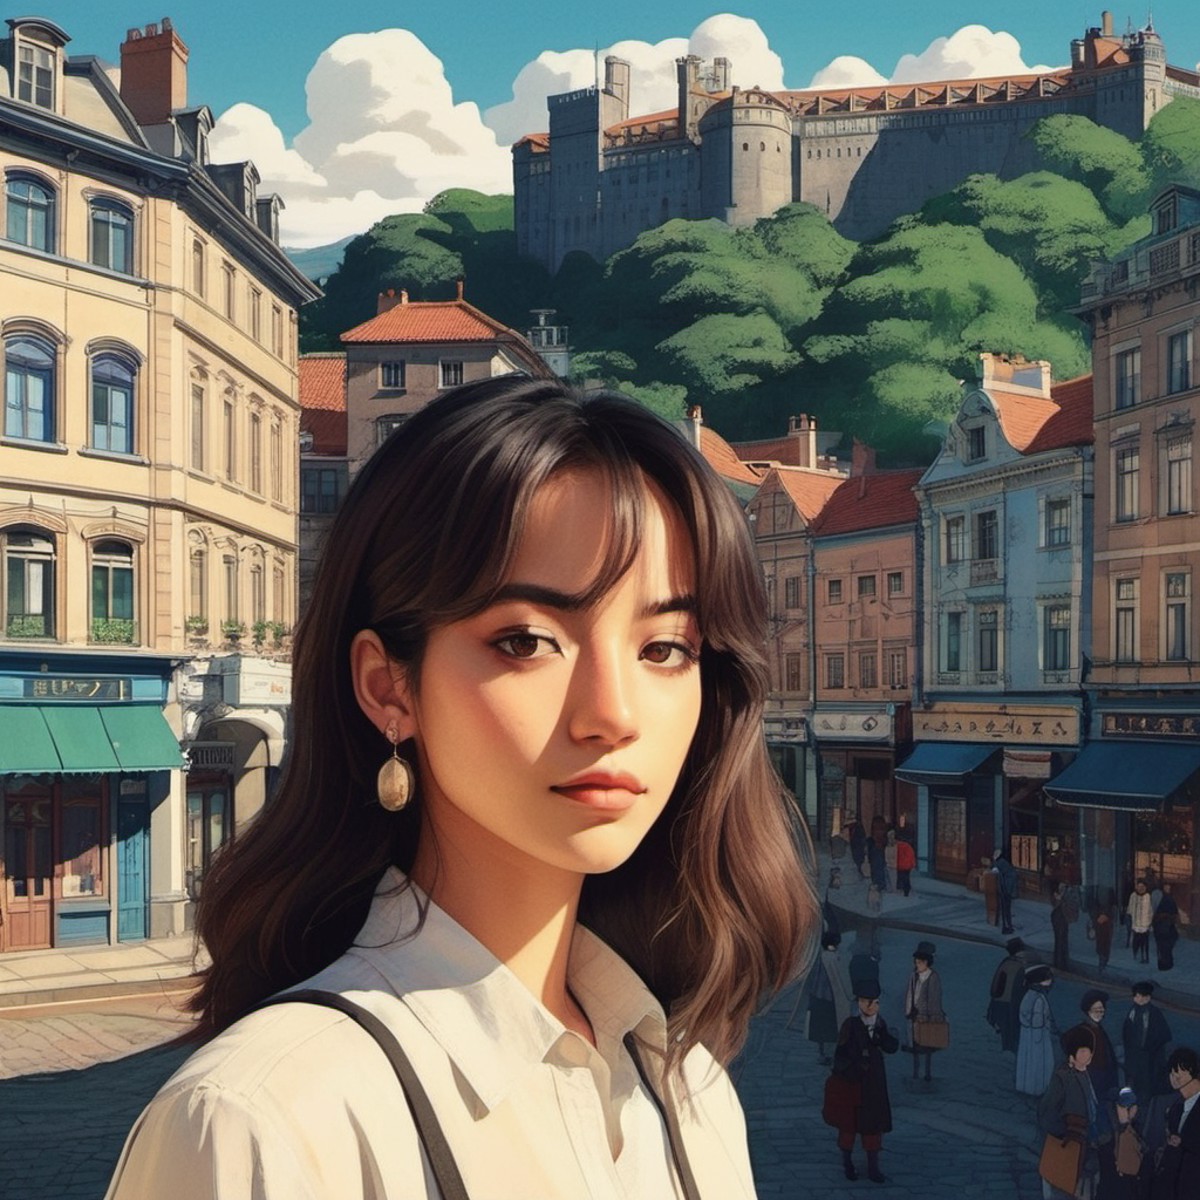 Studio ghibli style illustration of the face of a woman looking at the viewer with a victorian city square in the backgrou...